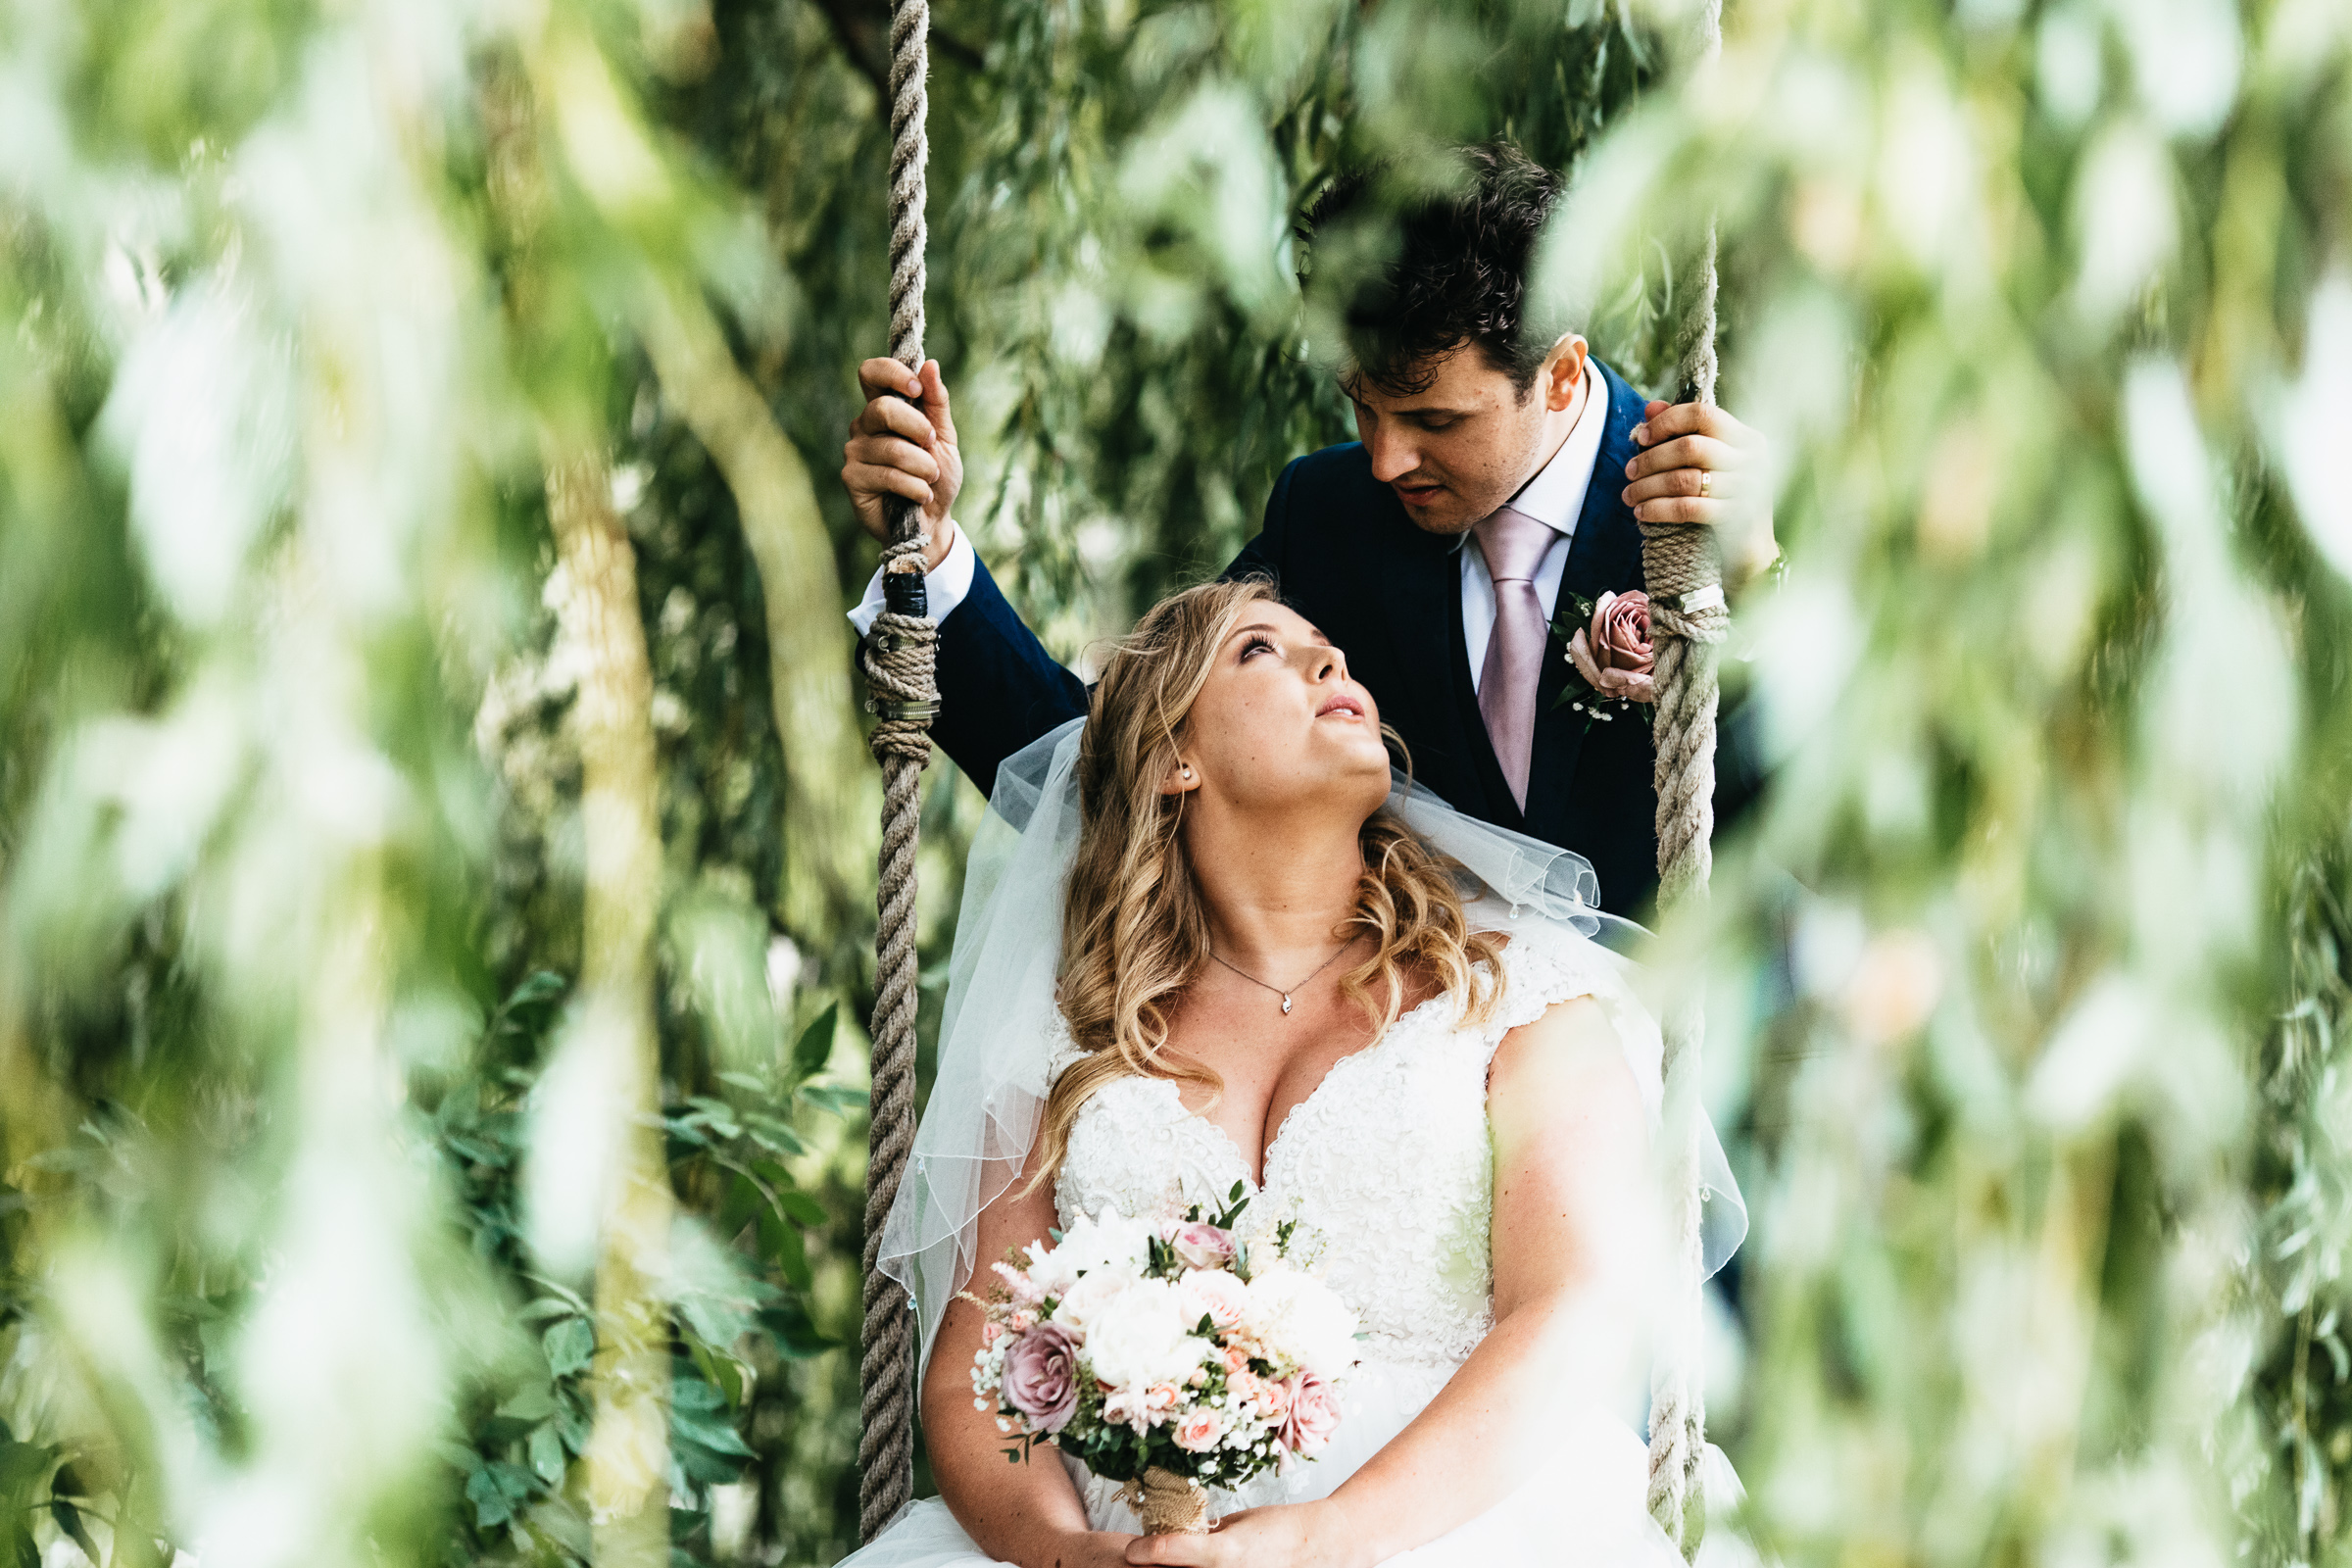 A bride sits on a swing hanging from a willow tree and her groom is behind her. She's looking up at him and holding her flowers. They are in the grounds of Anne of Cleves Barn Great Lodge wedding venue near Braintree.